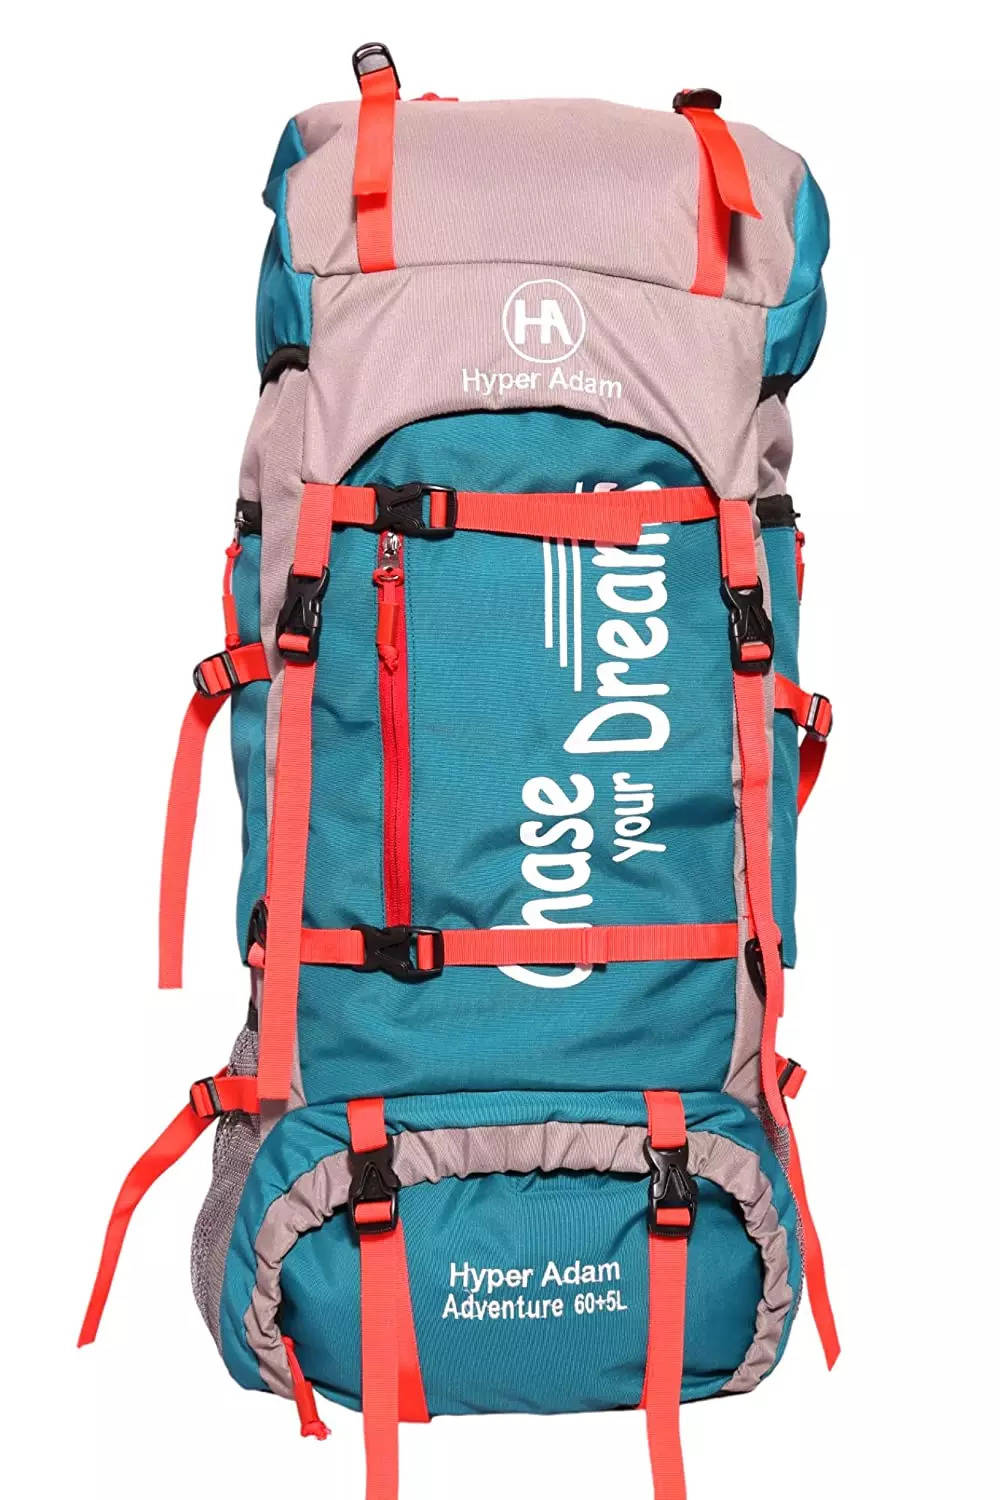 Wildmoda ROBOT 65 LT HIKING TREKKING BAG WITH LAPTOP COMPARTMENT Rucksack -  65 L (WMRS0022) in Bangalore at best price by Wildmoda - Justdial